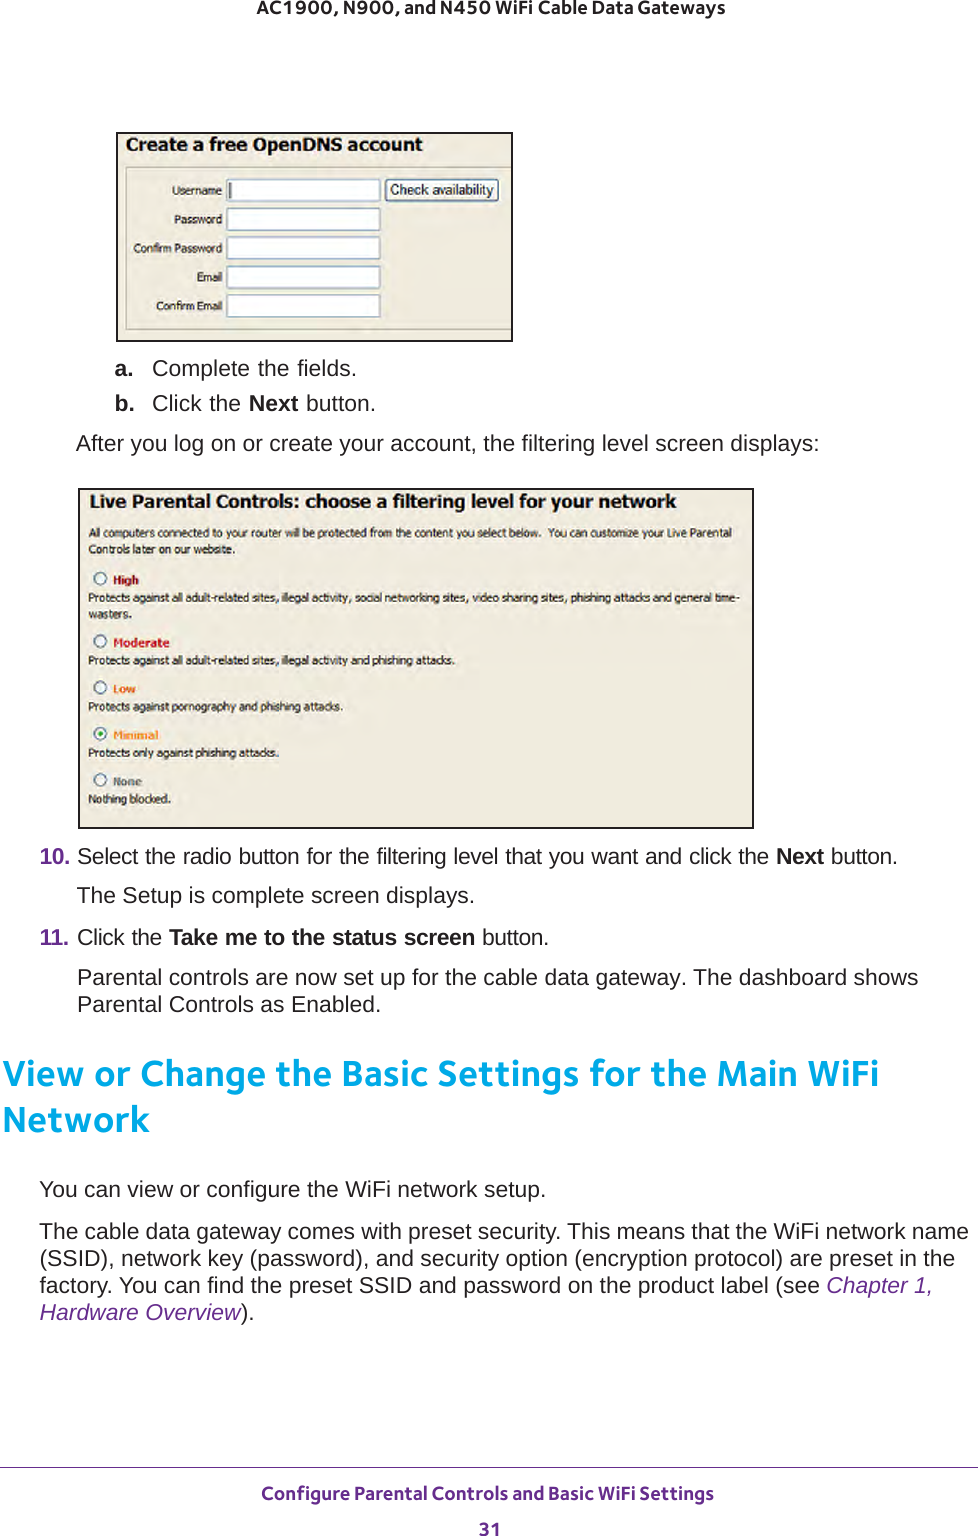 Configure Parental Controls and Basic WiFi Settings 31 AC1900, N900, and N450 WiFi Cable Data Gatewaysa.  Complete the fields.b.  Click the Next button.After you log on or create your account, the filtering level screen displays:10. Select the radio button for the filtering level that you want and click the Next button.The Setup is complete screen displays.11. Click the Take me to the status screen button.Parental controls are now set up for the cable data gateway. The dashboard shows Parental Controls as Enabled.View or Change the Basic Settings for the Main WiFi NetworkYou can view or configure the WiFi network setup.The cable data gateway comes with preset security. This means that the WiFi network name (SSID), network key (password), and security option (encryption protocol) are preset in the factory. You can find the preset SSID and password on the product label (see Chapter 1, Hardware Overview). 